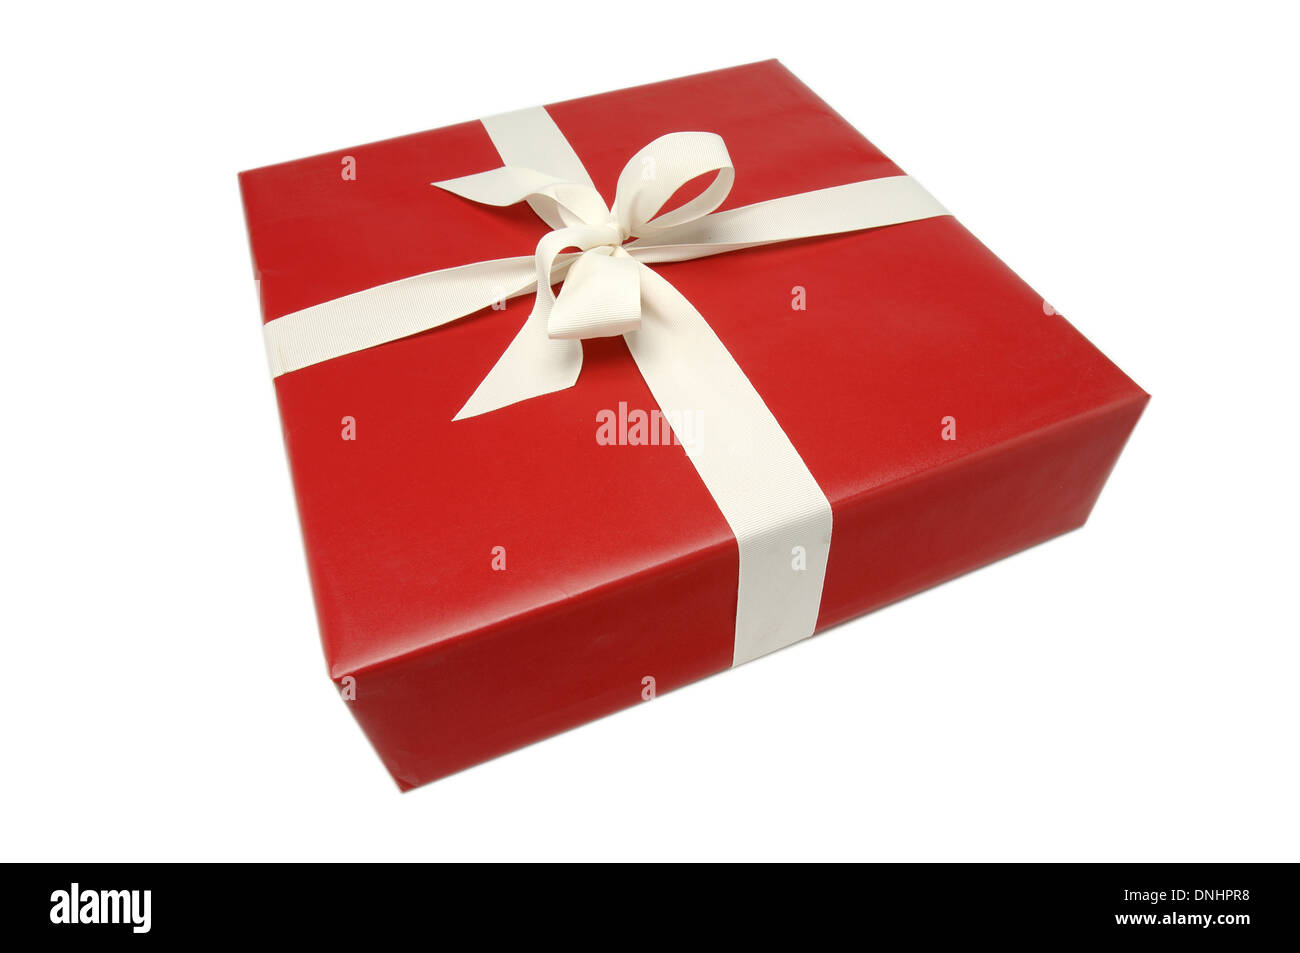 A wrapped present with red paper and a ribbon bow on a white background. Stock Photo